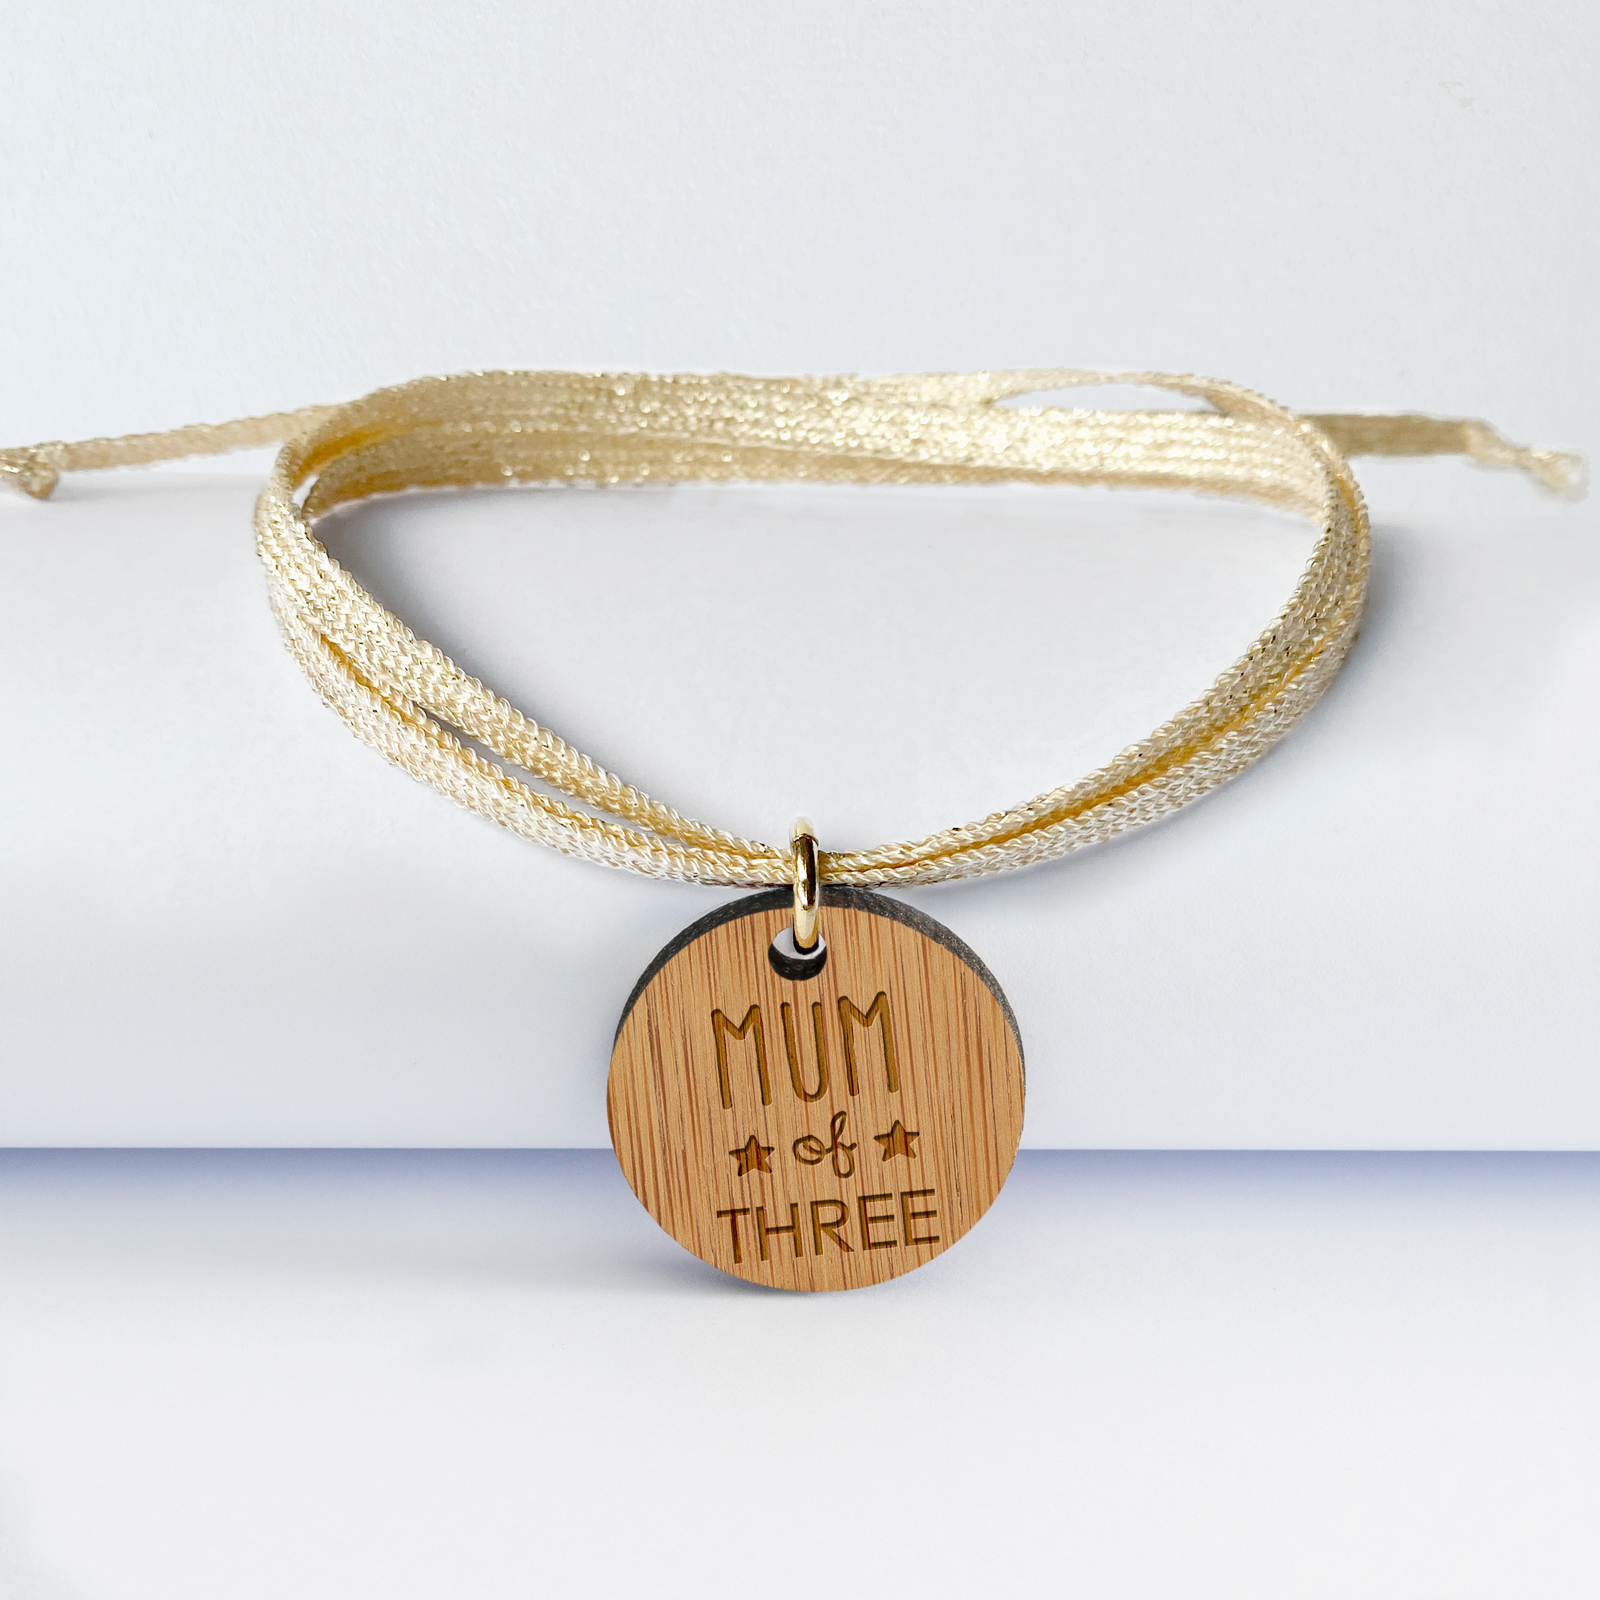 Personalised 3 turn bracelet engraved medal with round sleeper wood 20 mm - special edition "Mum of three"